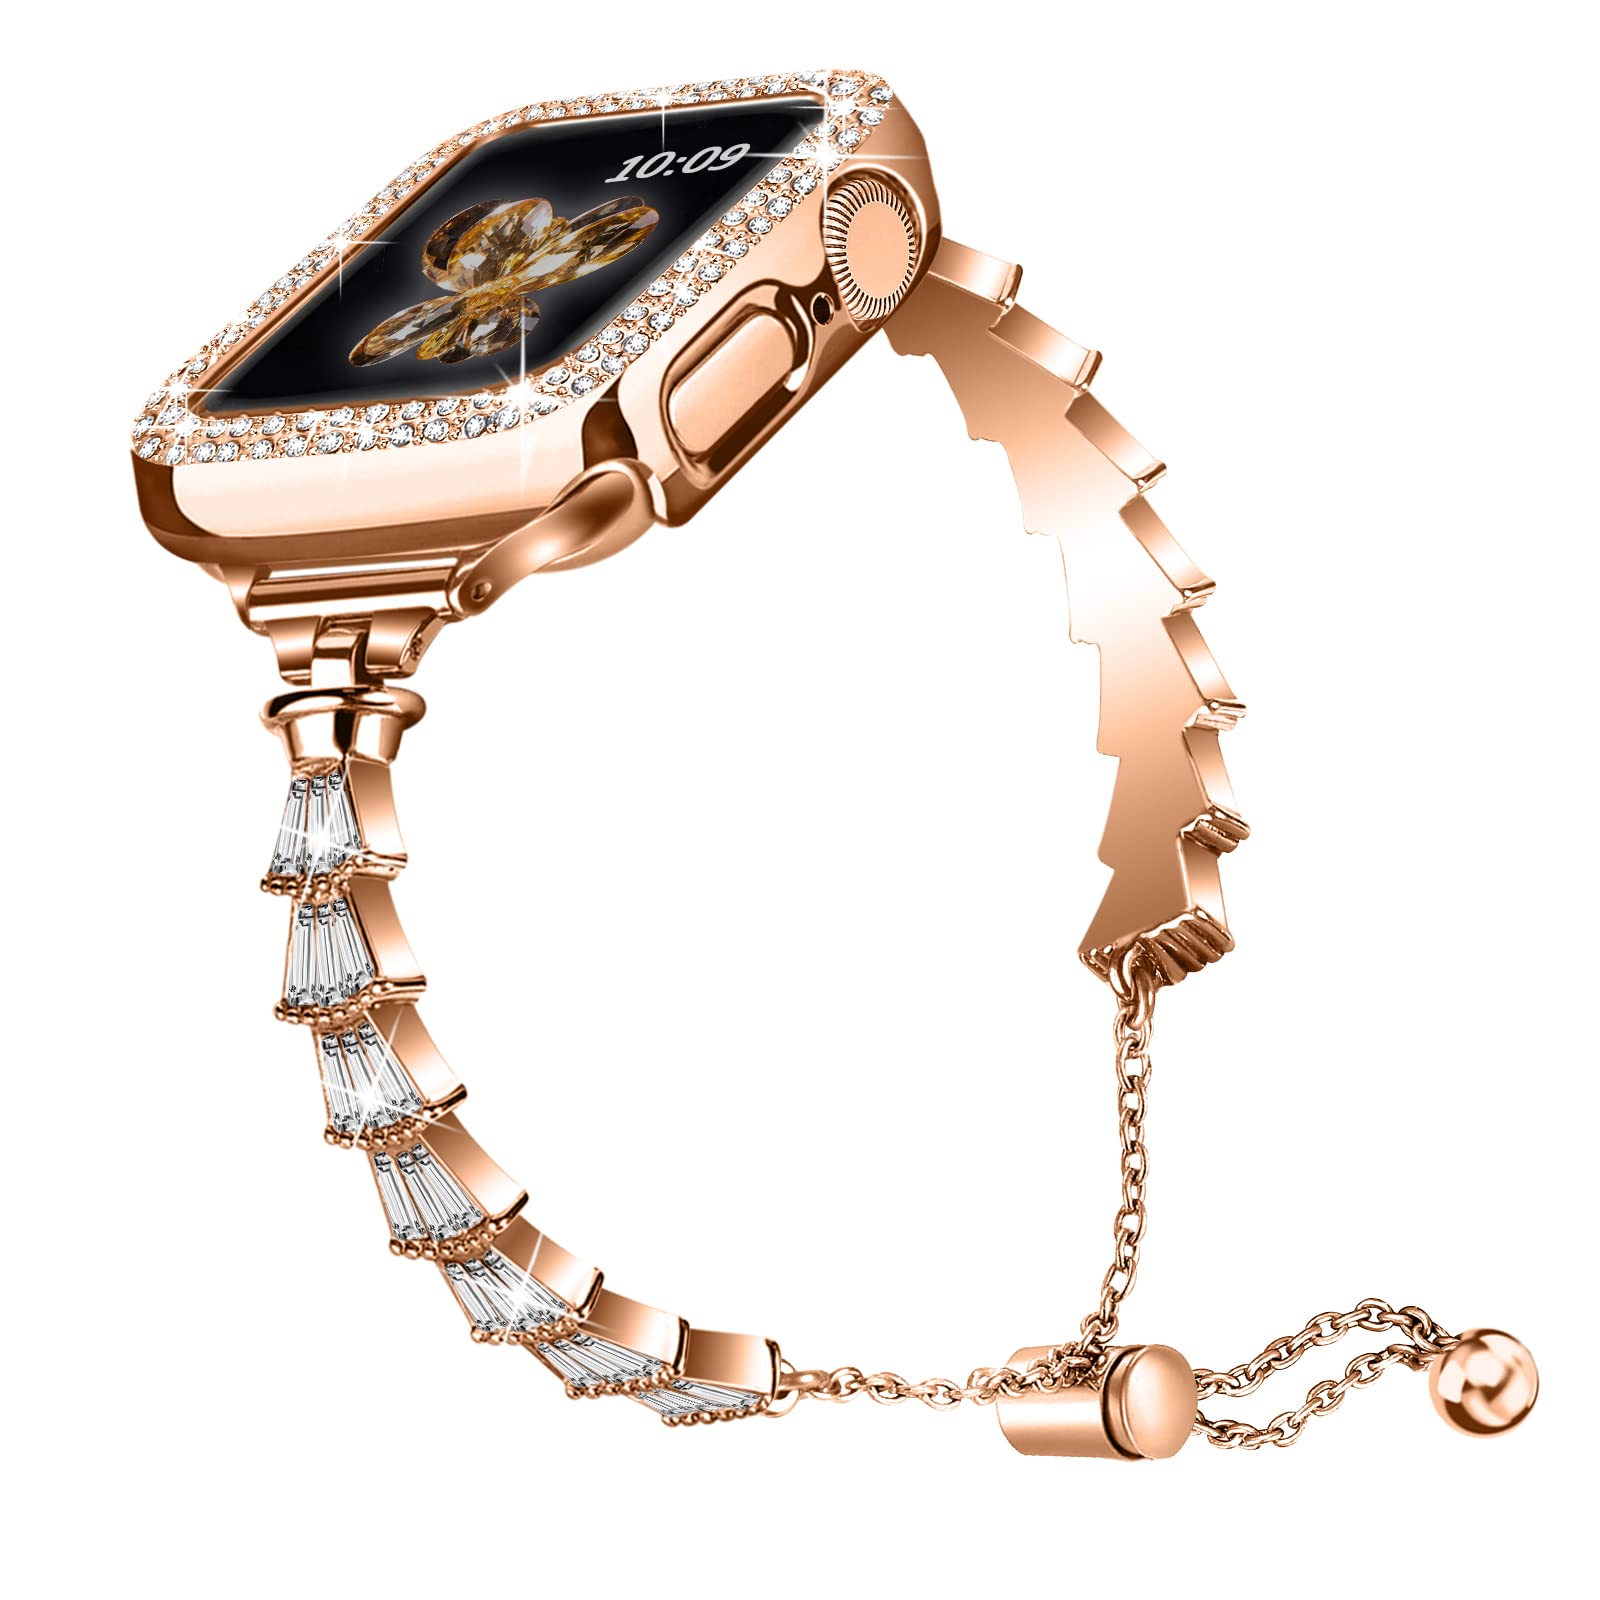 Sparkling Rhinestones Jewelry Bracelet with Case iWatch Bands for Apple Watch All Series